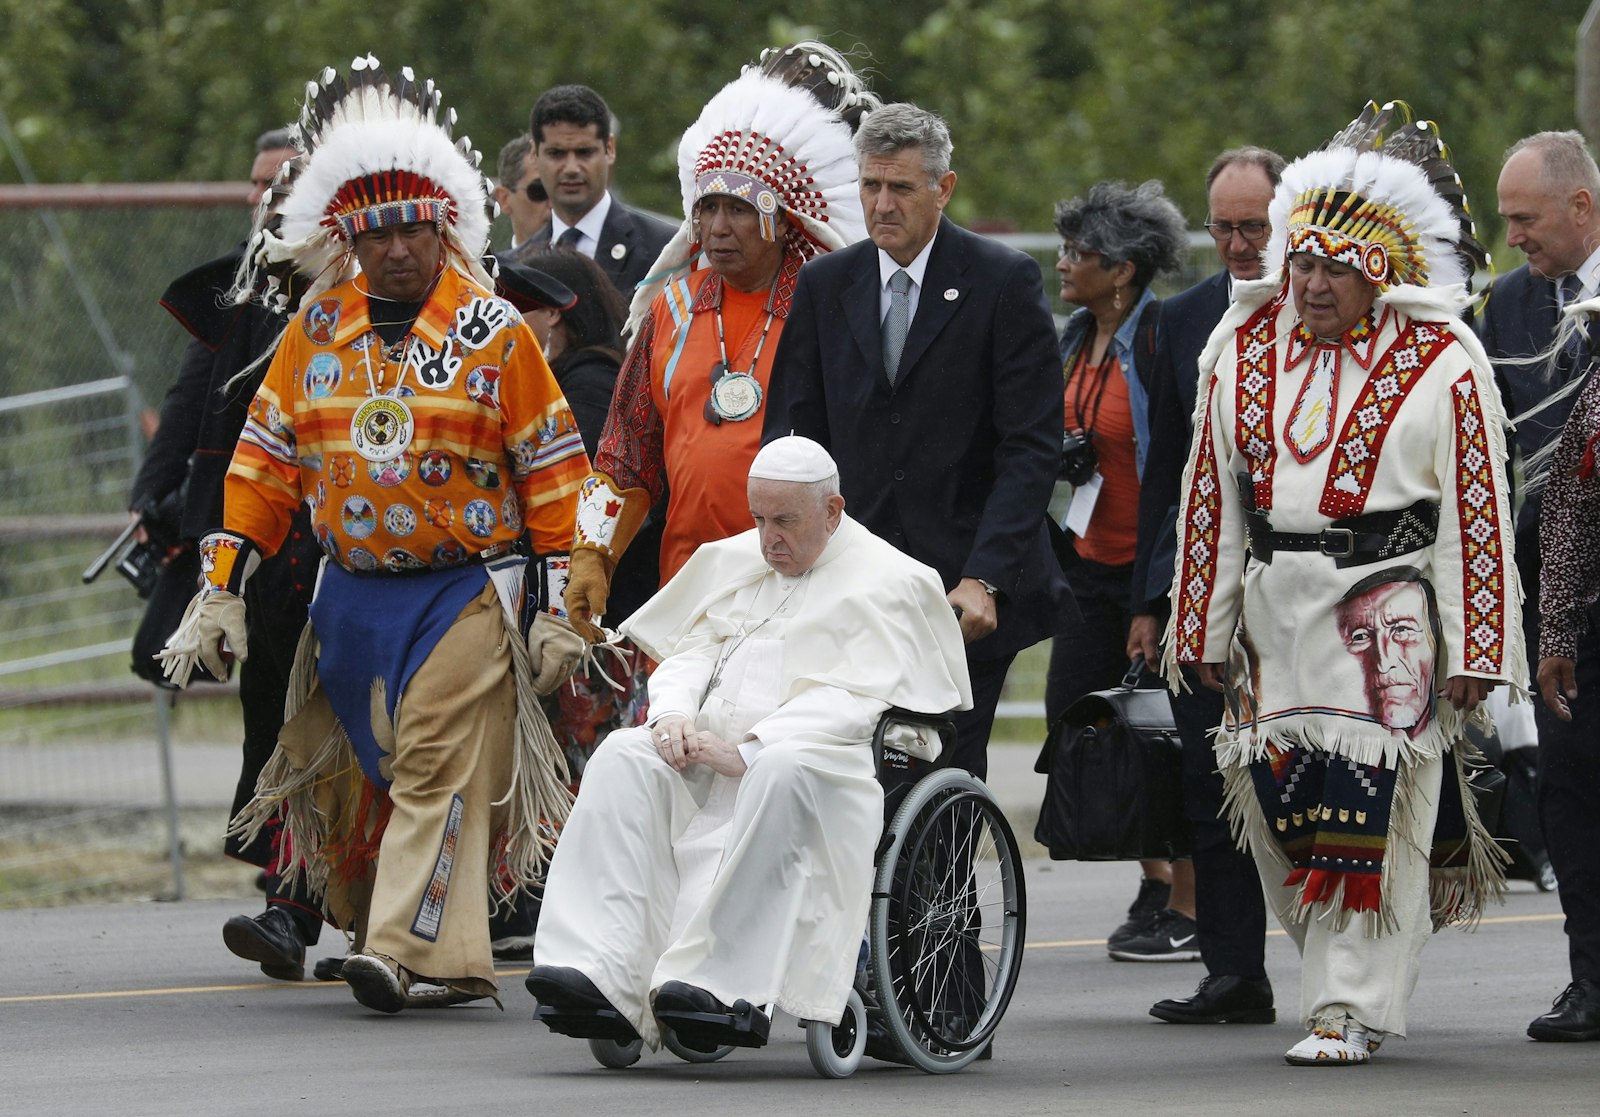 Pope Francis arrives with Indigenous leaders for a meeting with First Nations, Métis and Inuit communities at Maskwacis, Alberta, July 25, 2022. (CNS photo/Paul Haring)